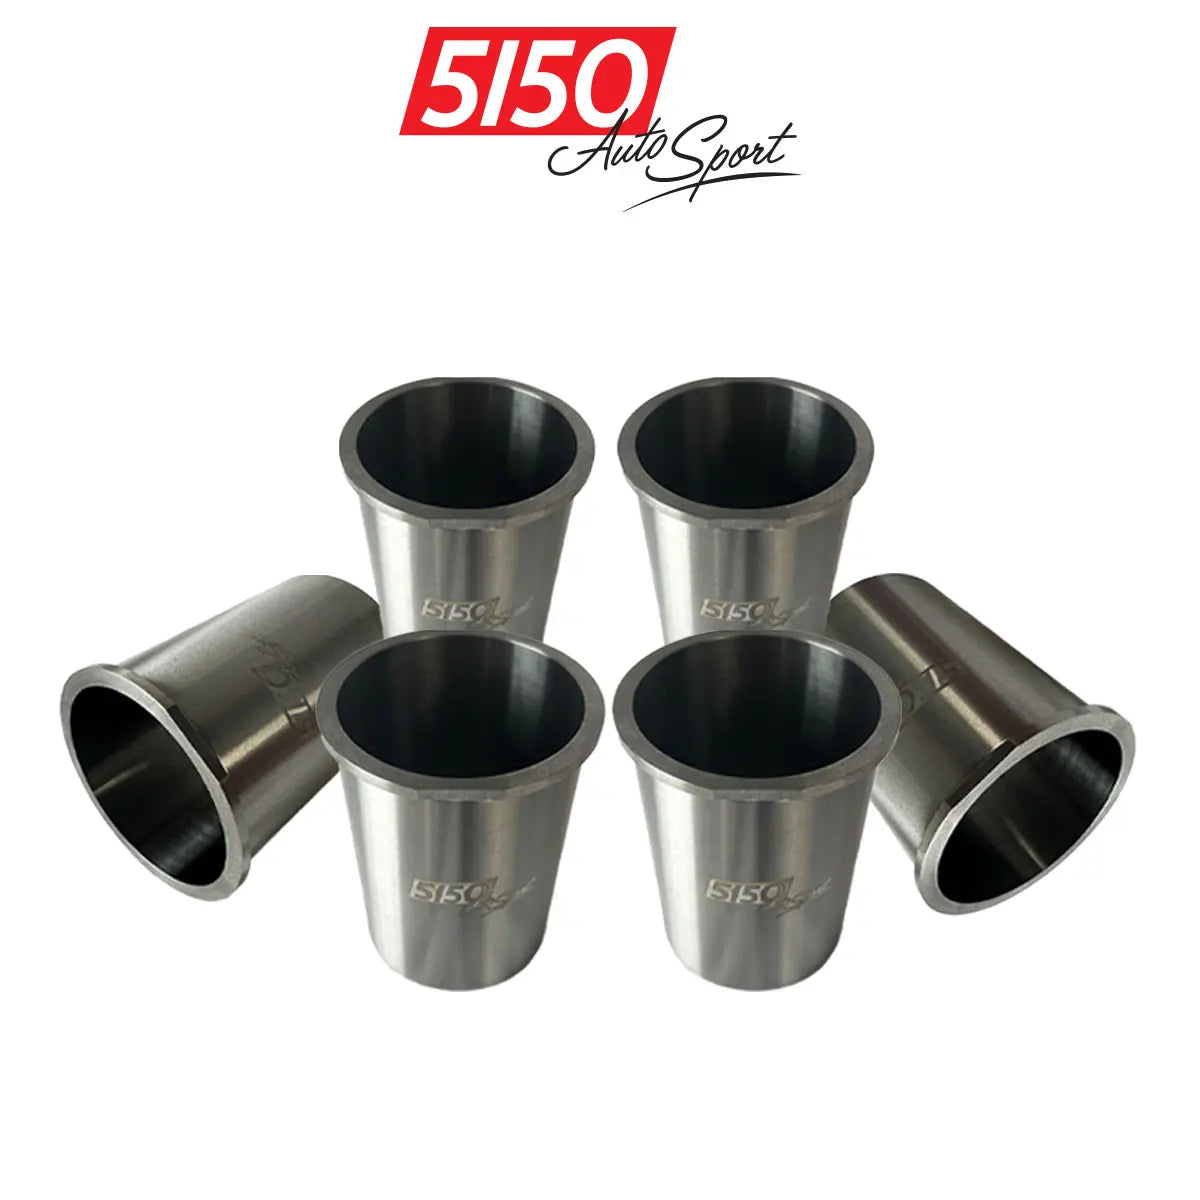 5150 AutoSport Iron Cylinder Sleeve Set for BMW and Toyota B58 Engines